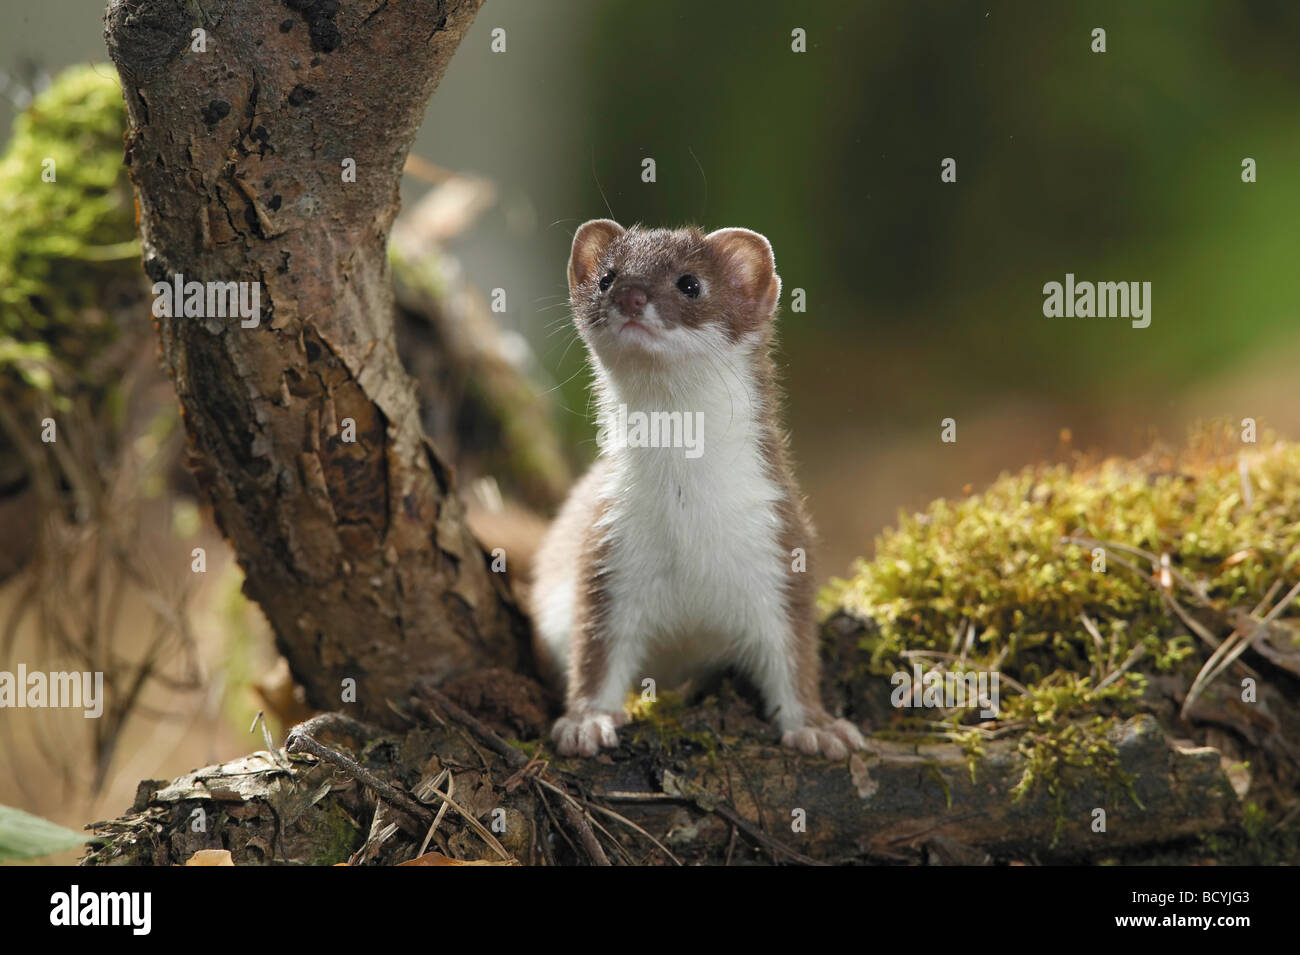 Ermine , Stoat (Mustela erminea) standing on a mossy log Stock Photo